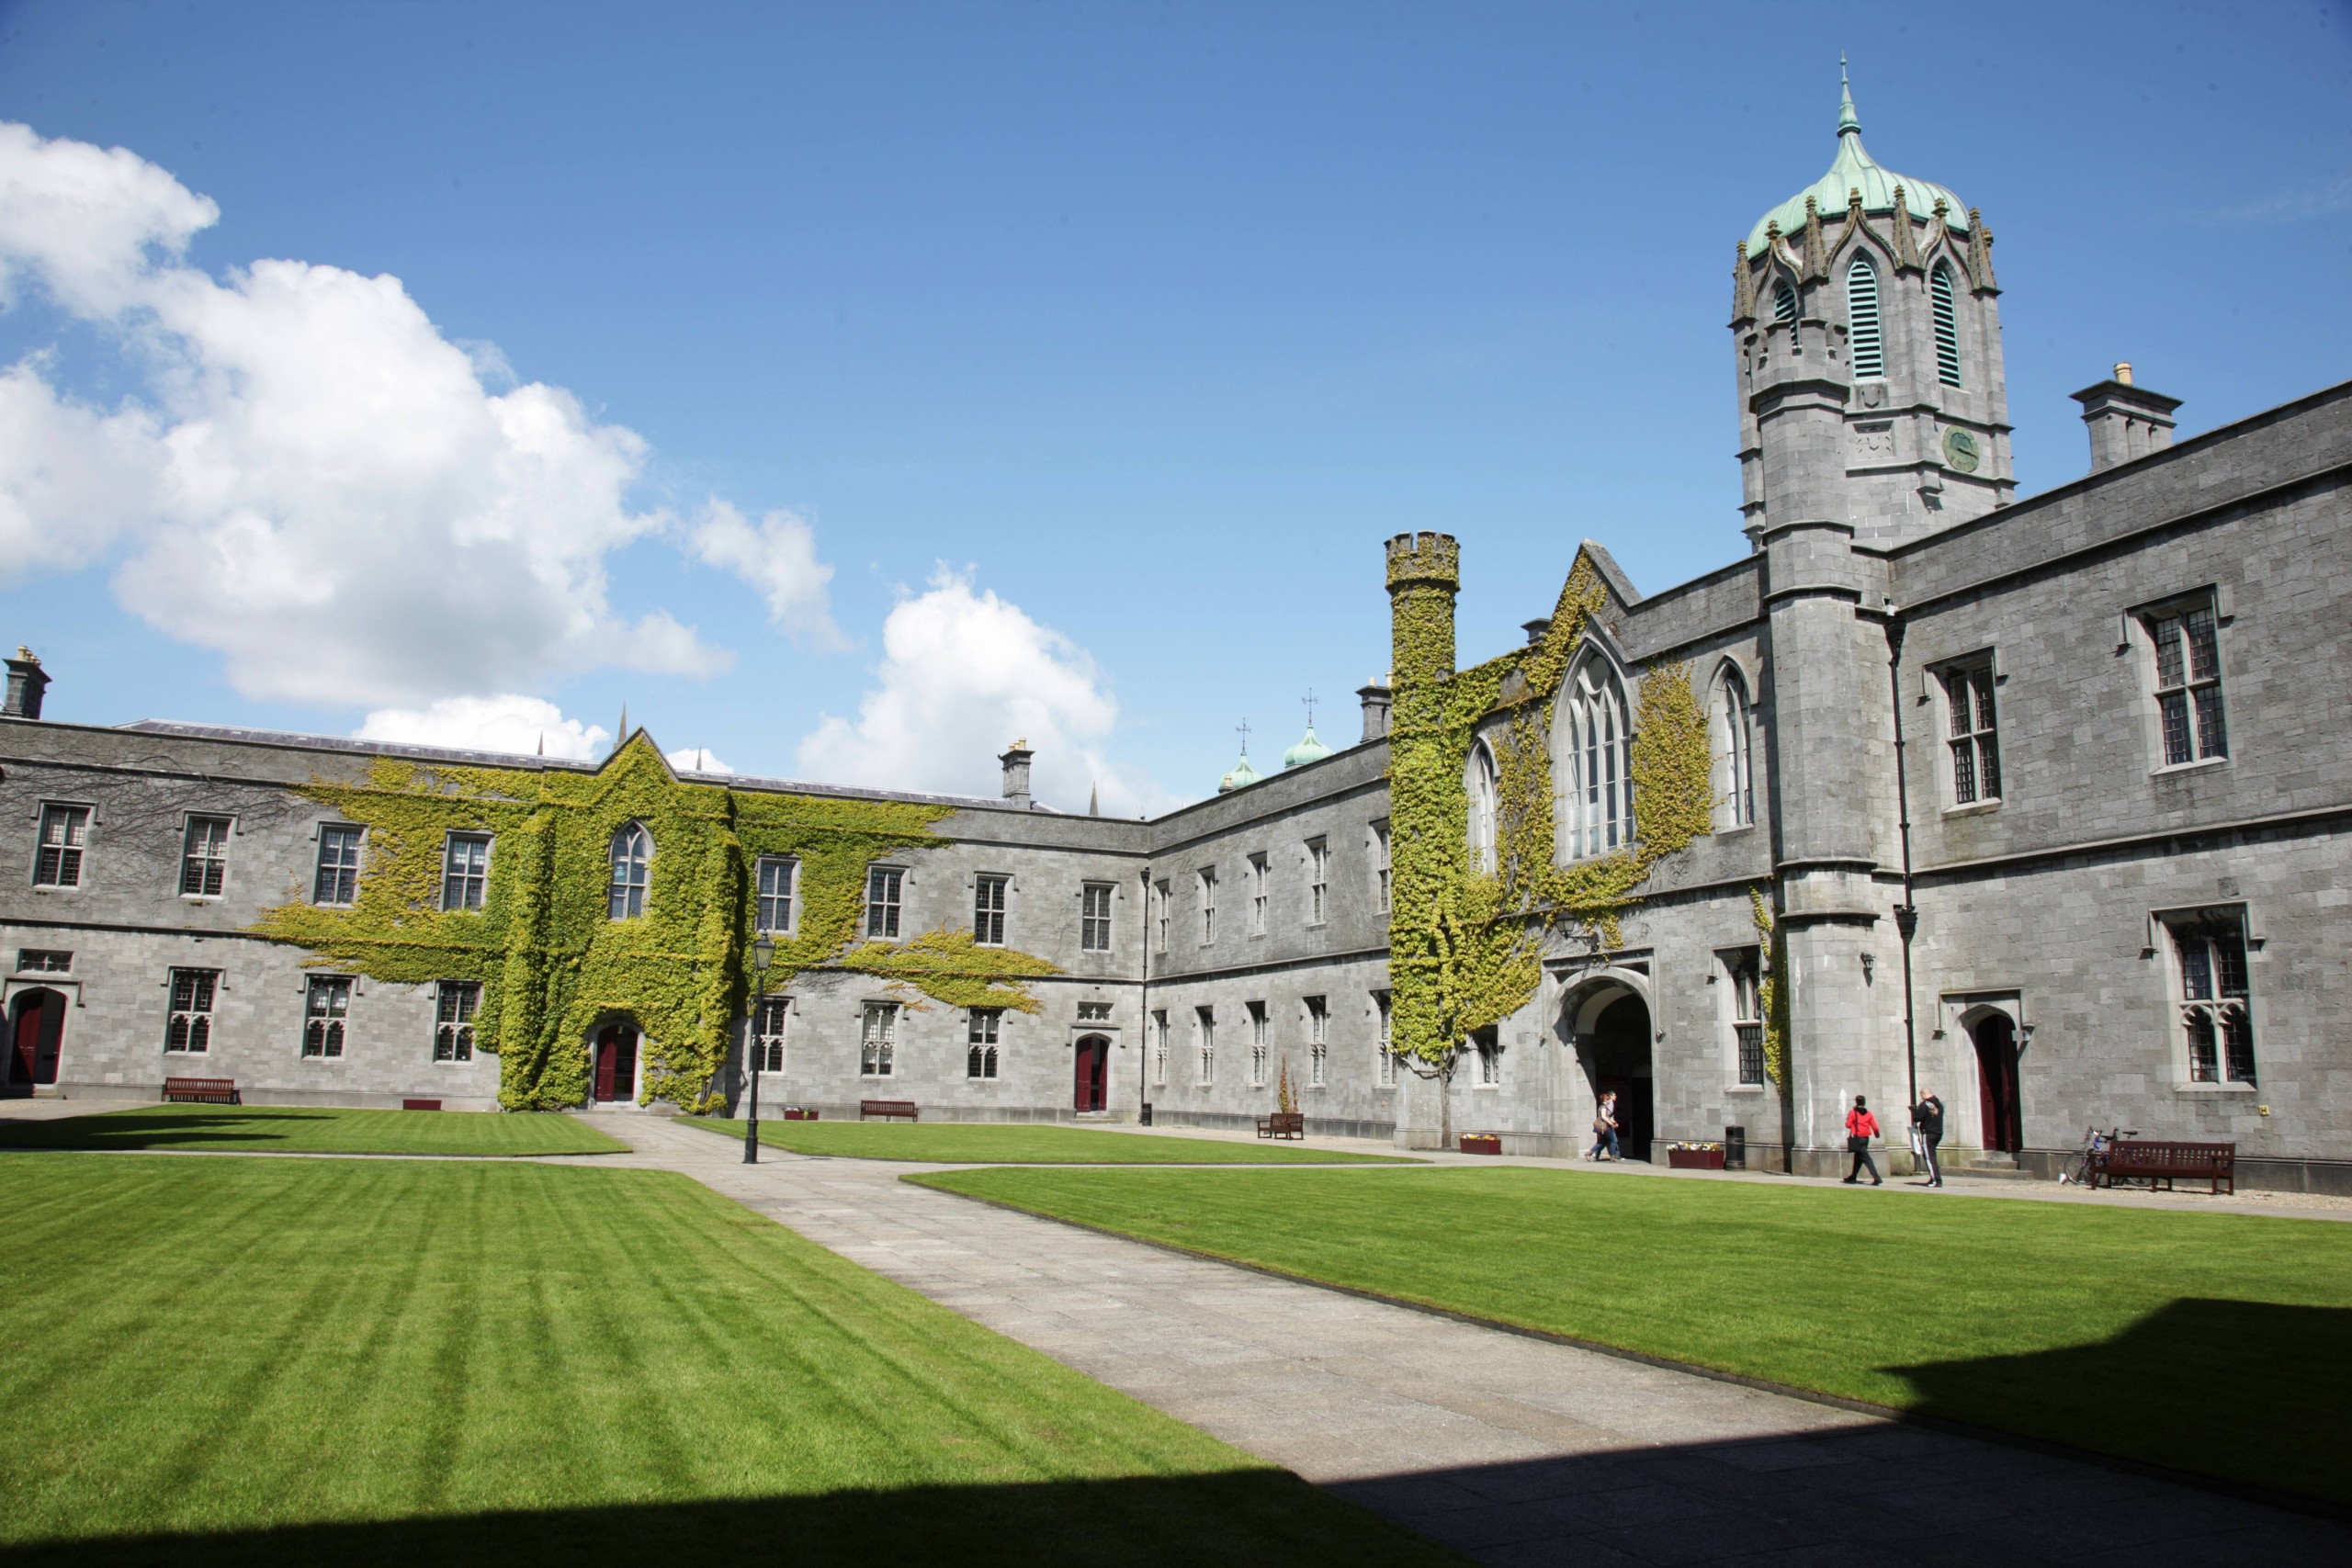 The quadrangle buiding in NUIG photographed from the inner square.